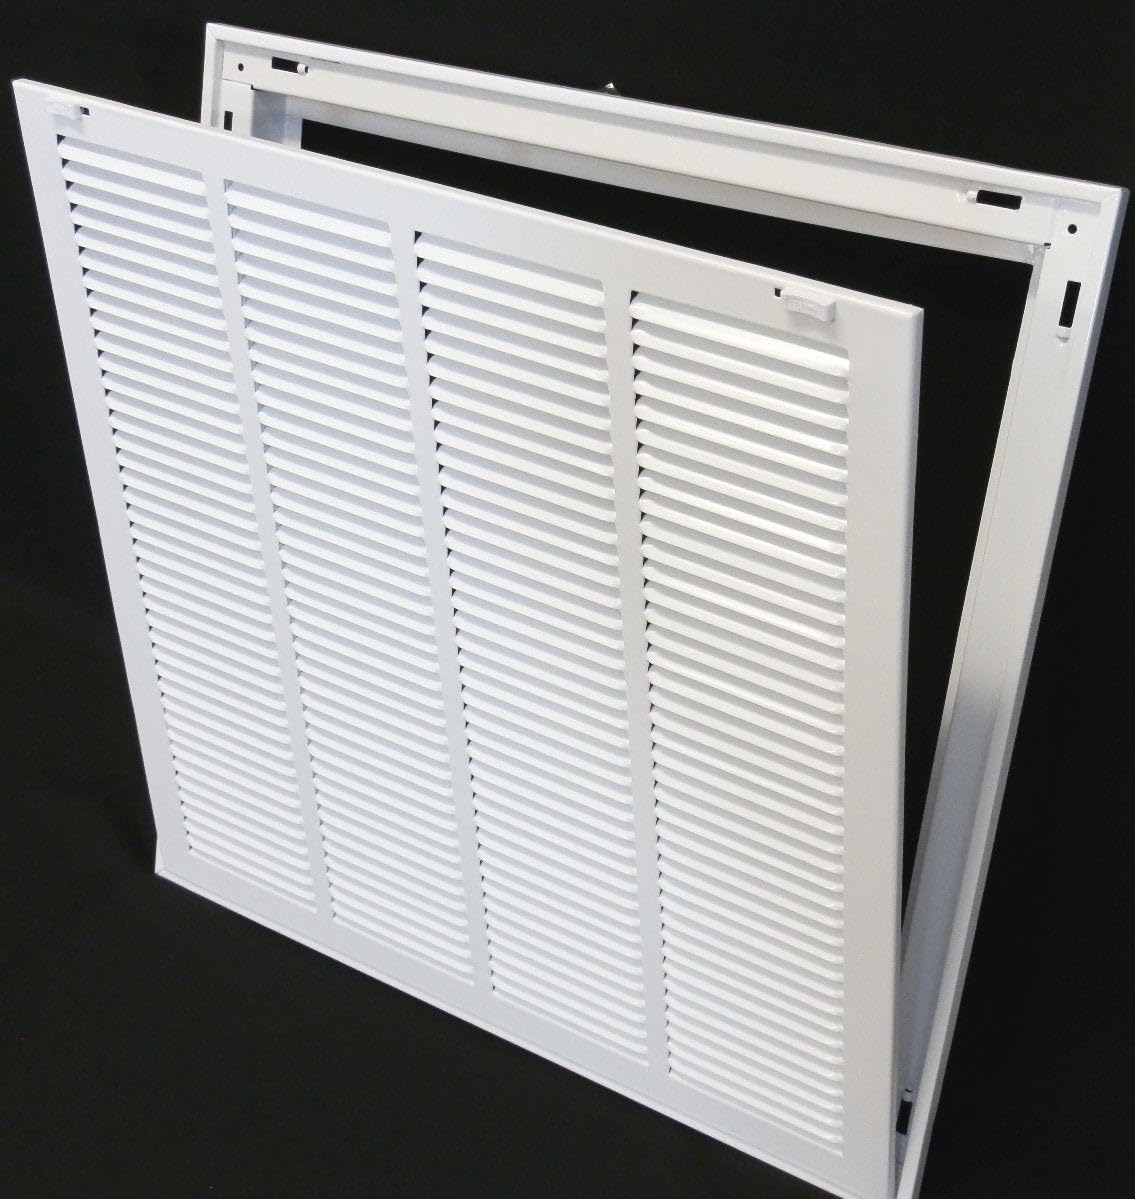 30&quot; X 20&quot; Steel Return Air Filter Grille for 1&quot; Filter - Removable Frame - [Outer Dimensions: 32 5/8&quot; X 22 5/8&quot;]